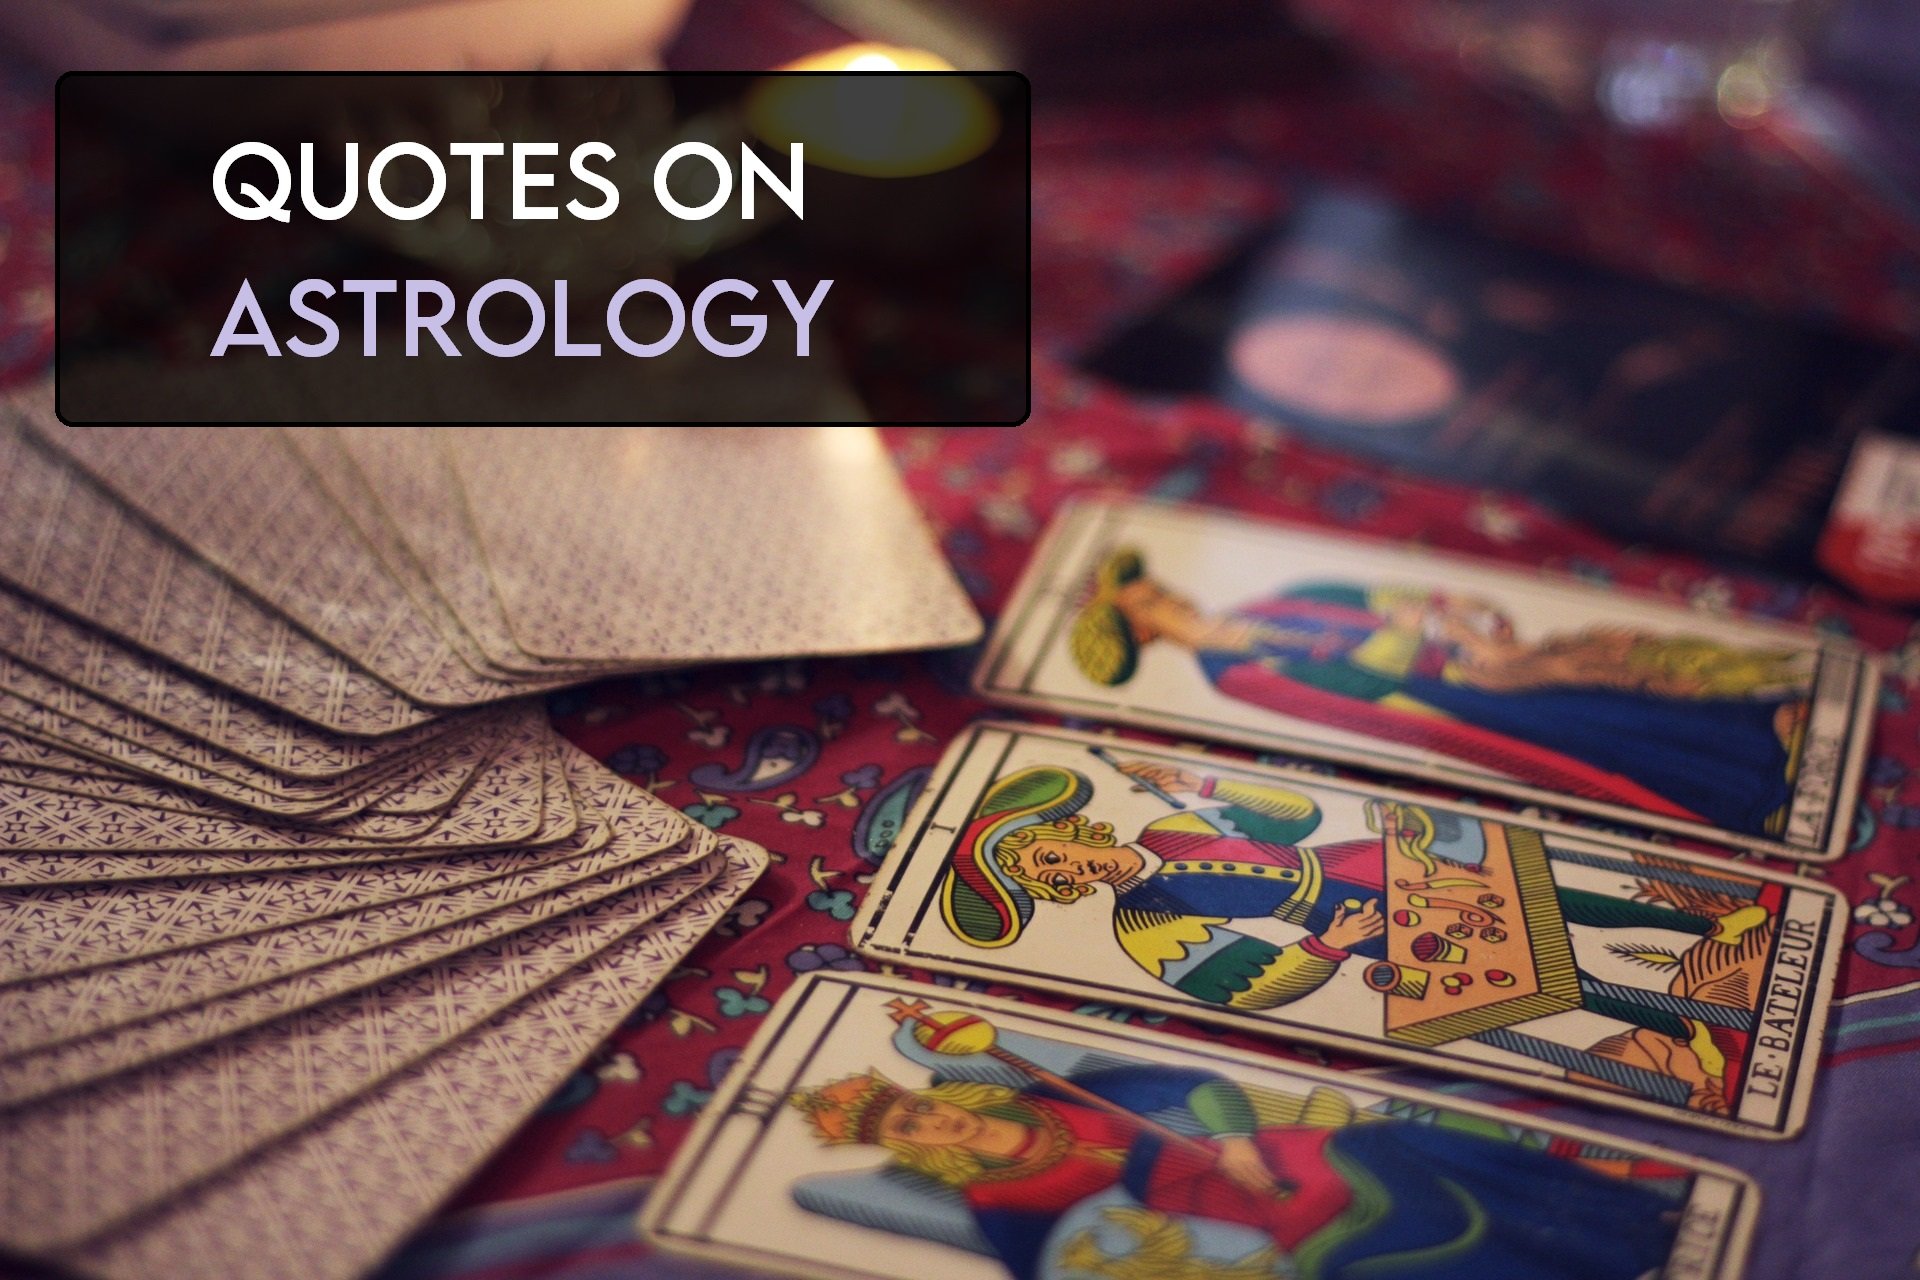 100+ Quotes On Astrology, Horoscopes, and MORE!